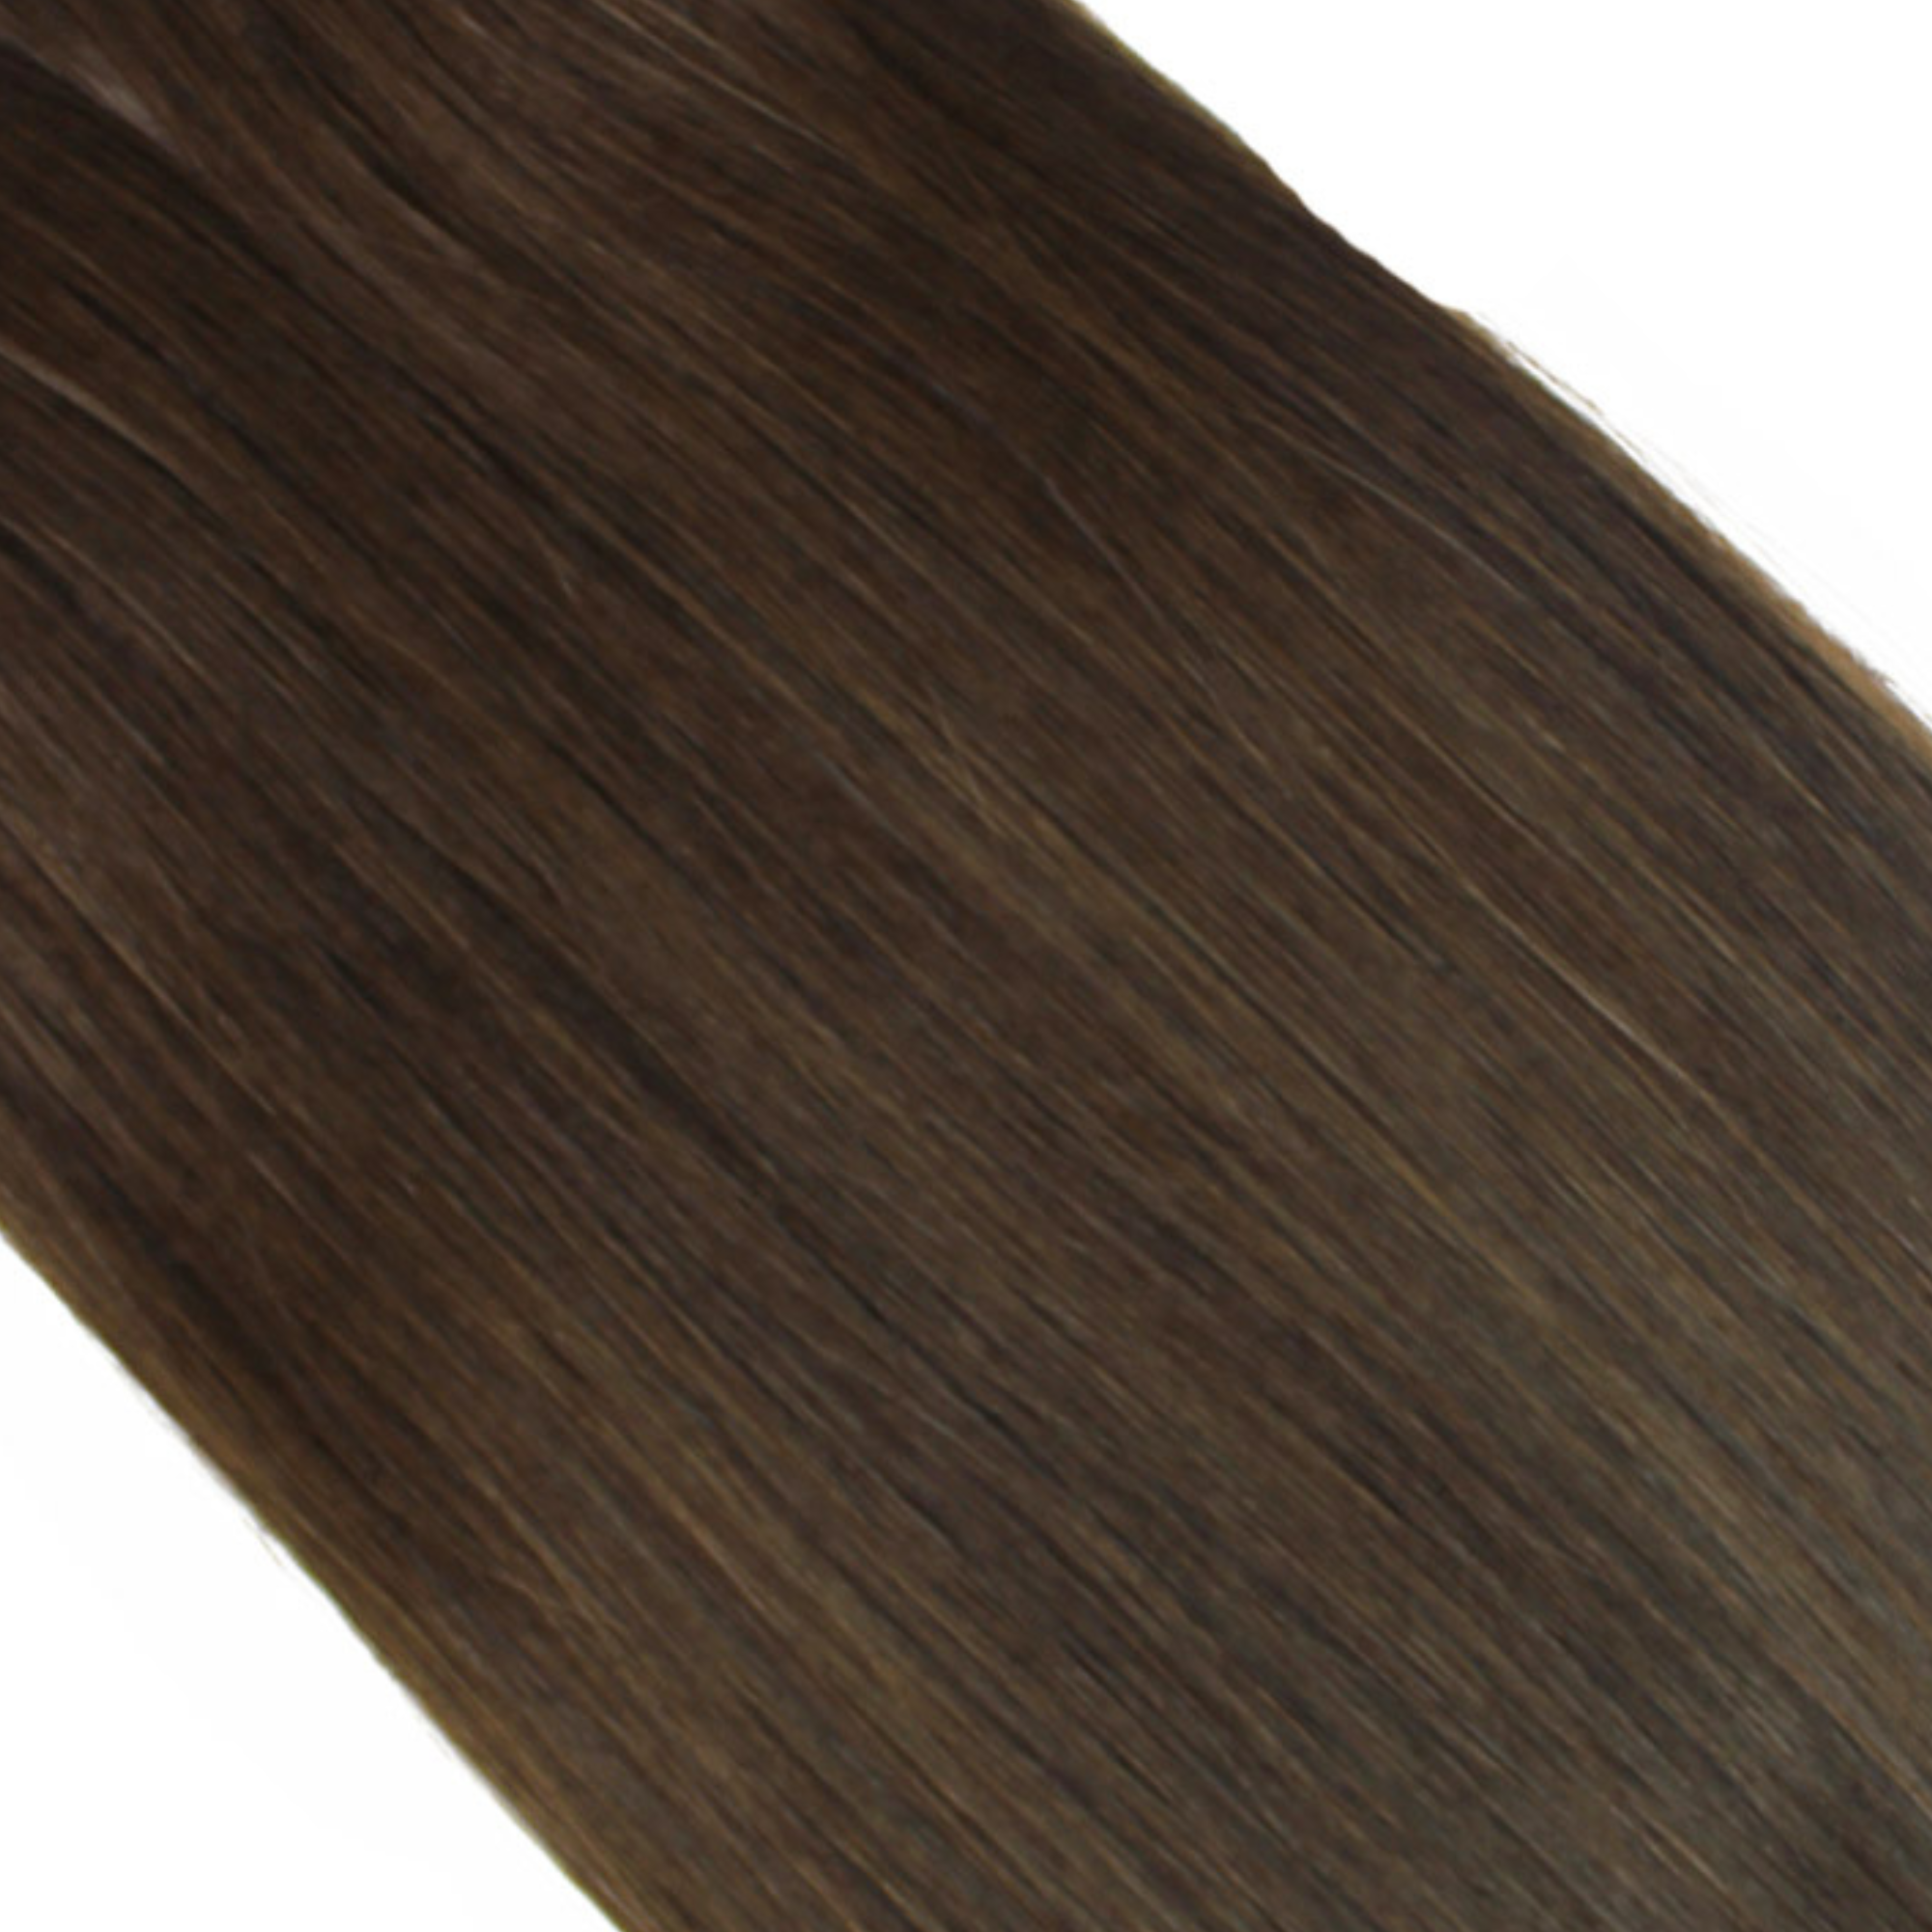 "hair rehab london 18" tape hair extensions shade swatch titled paparazzi perfect"